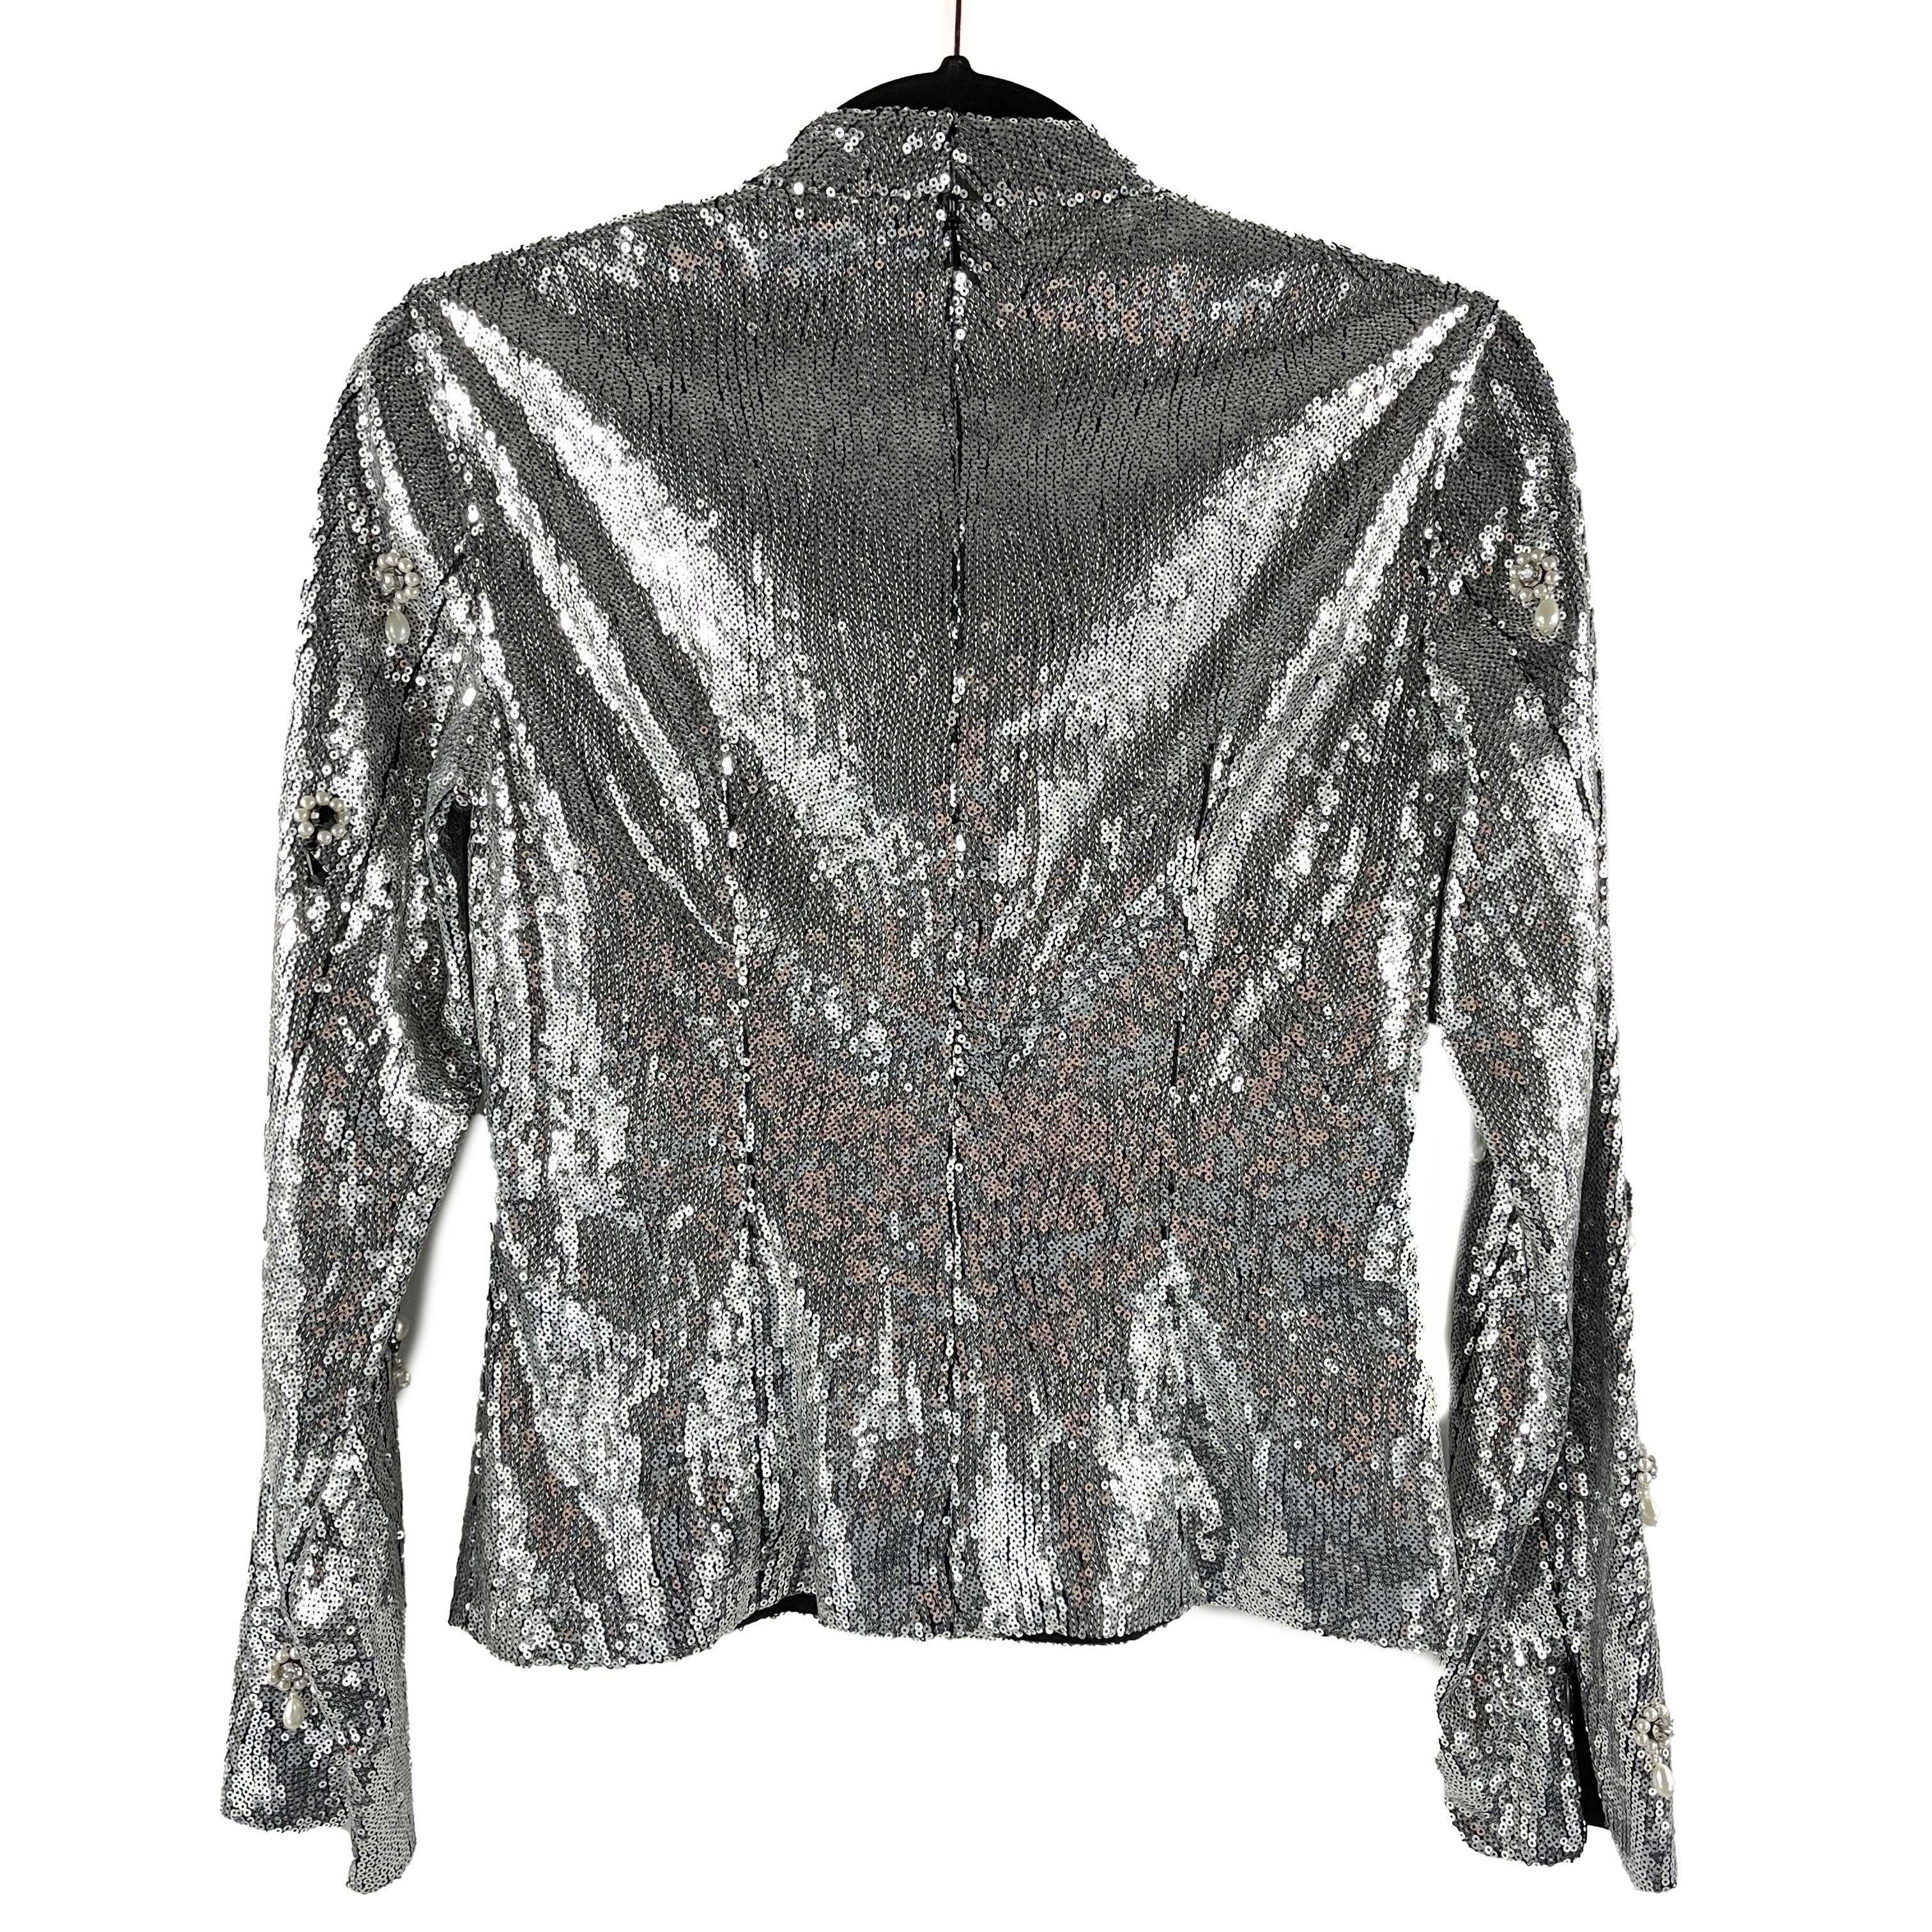 This long sleeved shirt design by Erdem is crafted with polyester and a black silk lining.
Its embellished with silver sequins along with white faux pearls, black beads, and clear crystals that form floral/dangle detailing throughout.
It also